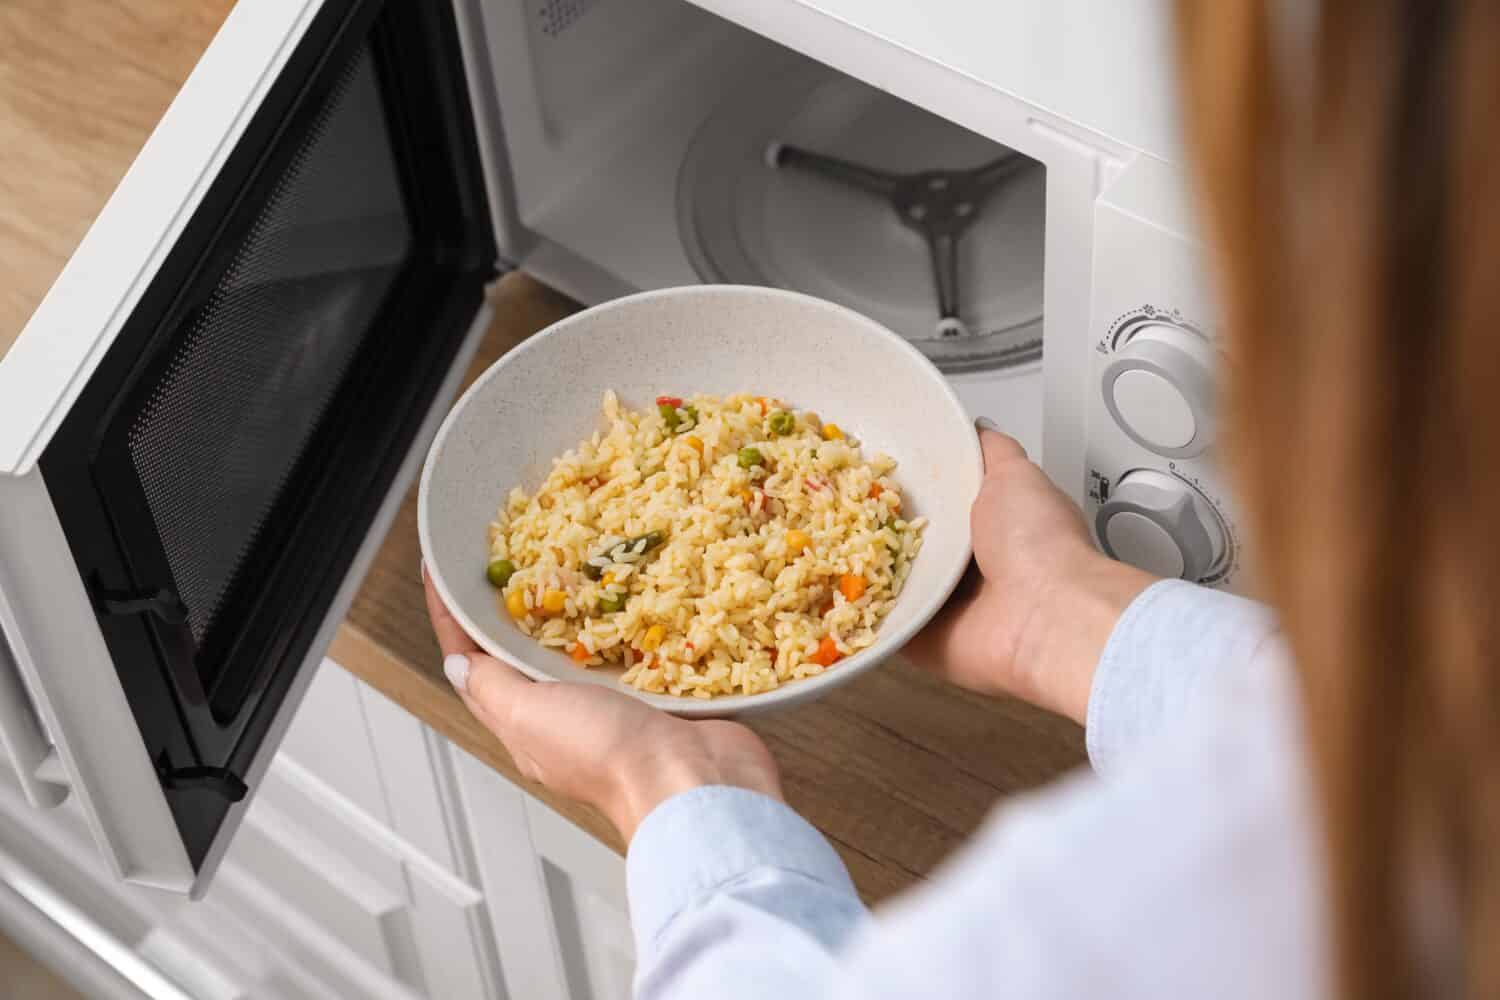 Woman heating food in microwave oven